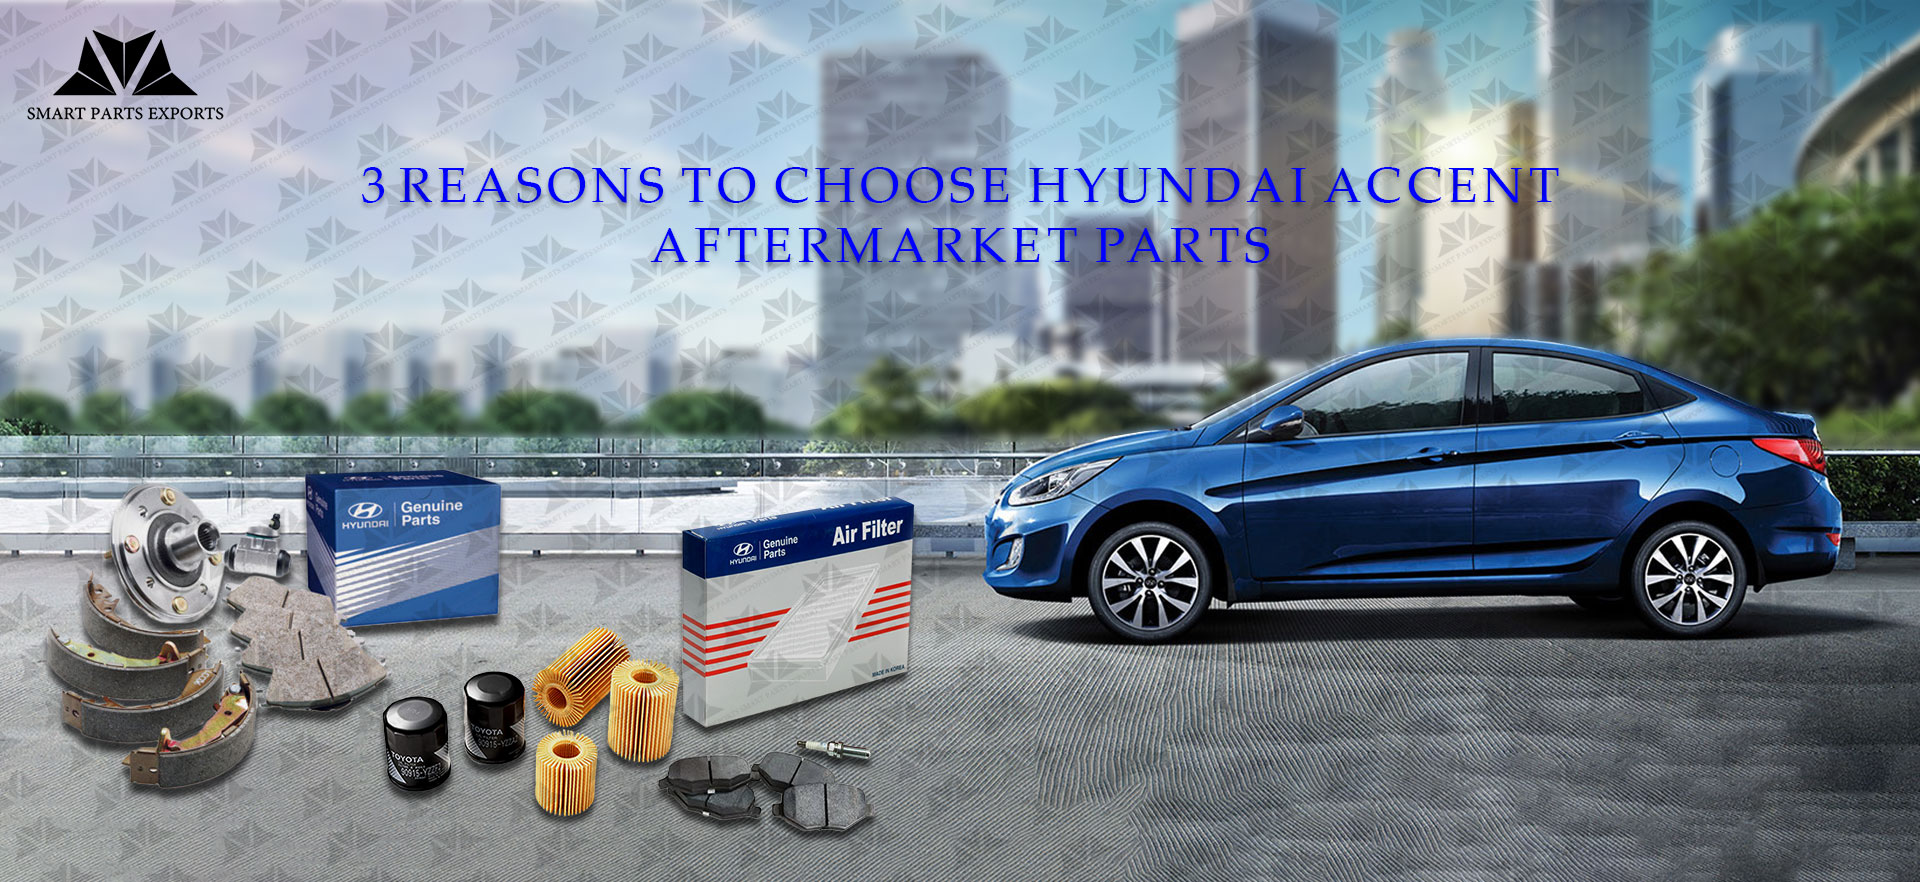 Hyundai Accent parts exporter - a one-stop shop for all your needs